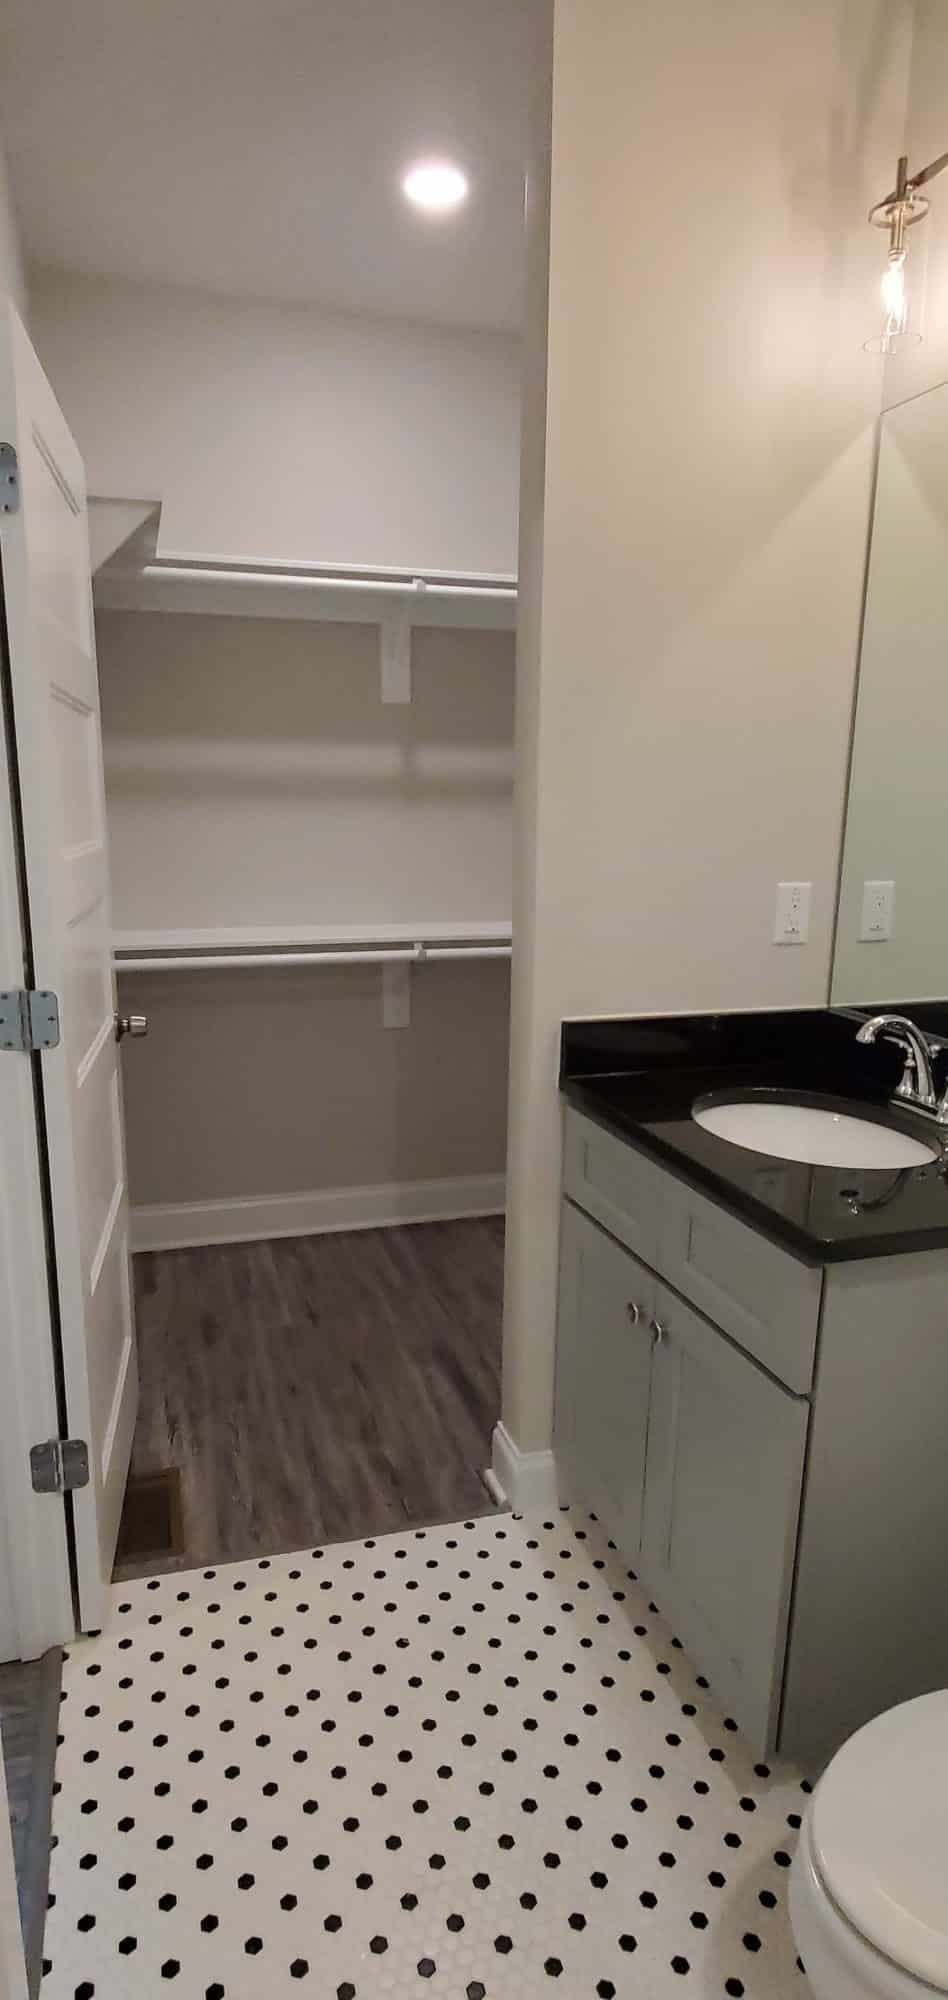 raleigh off campus apartments marcom st off campus apartments near nc state university walk in closet in private bathroom